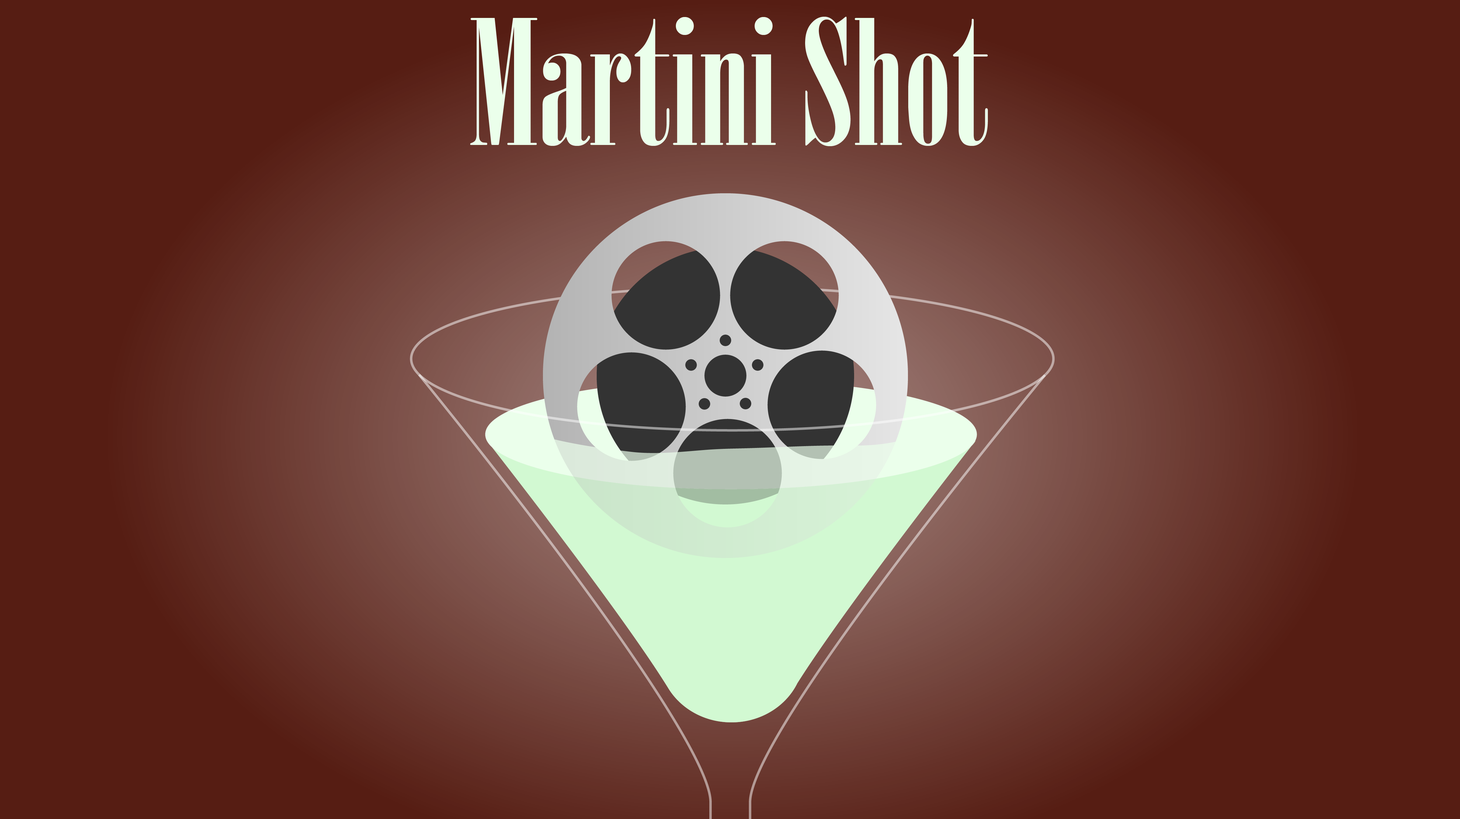 This is Rob Long and on today’s Martini Shot I remember a few weeks ago, when videos of unidentified aerial phenomena surfaced, and the Navy said, yeah, those were UFOs, and then we all went Huh and moved on, instead of freaking out like every…